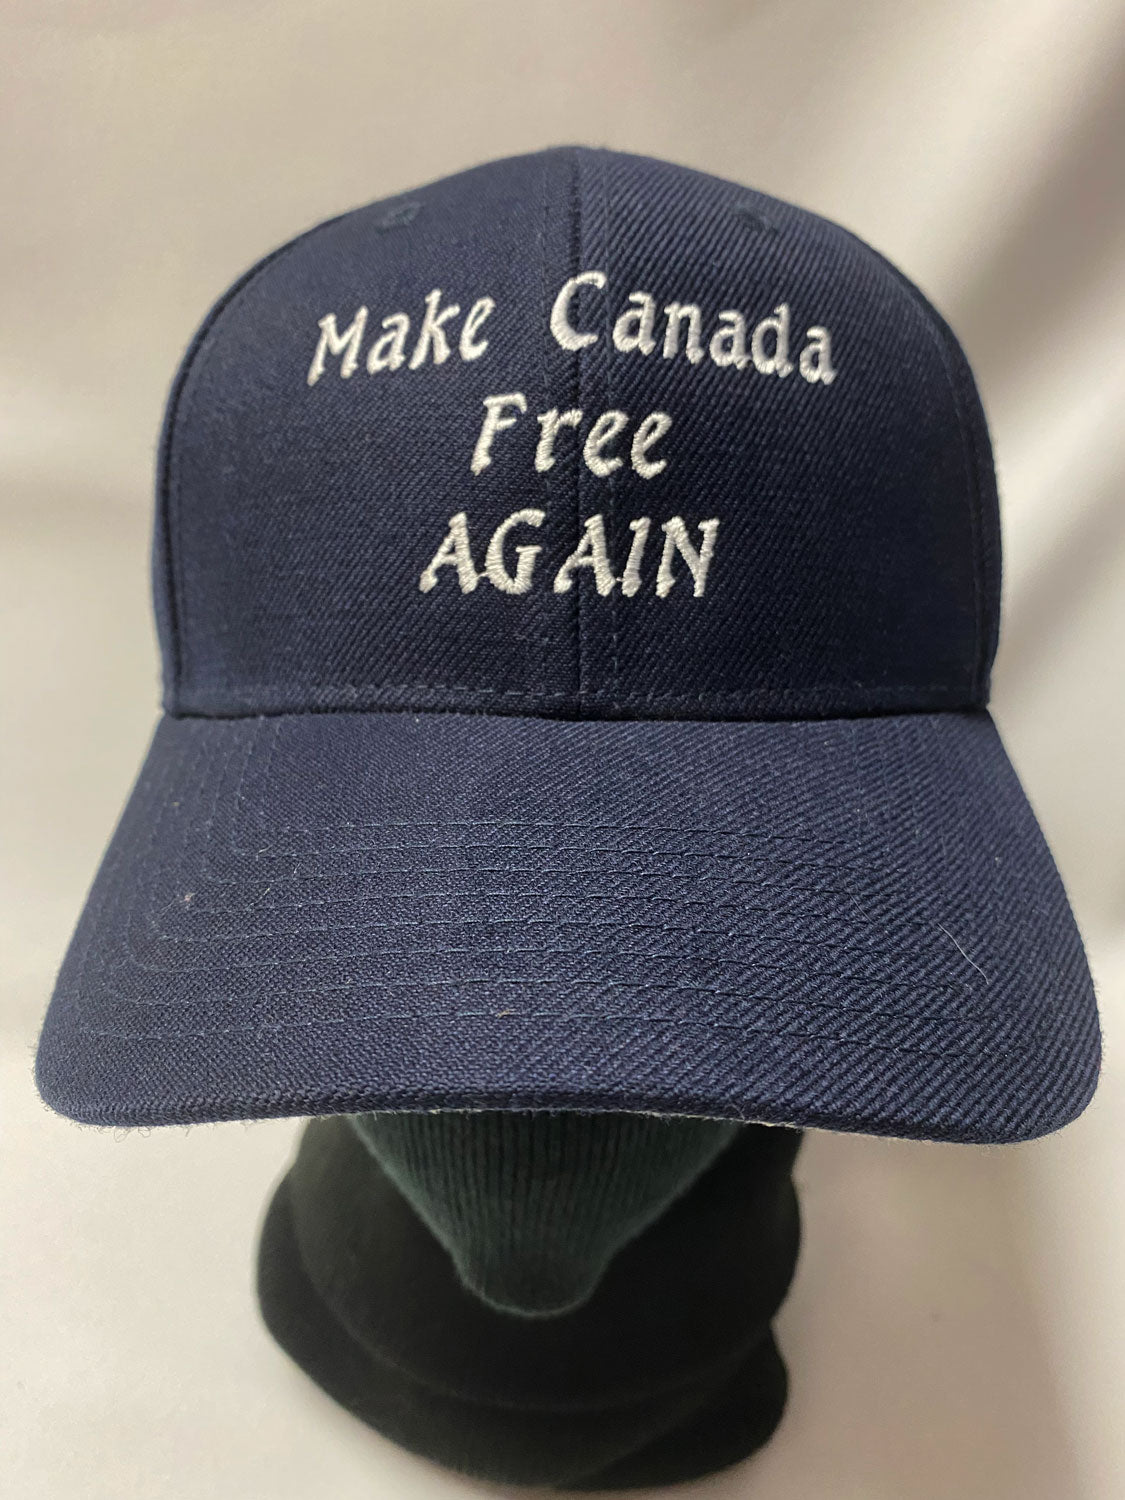 BALL CAP MAKE CANADA FREE AGAIN 2022 - white embroidery on navy